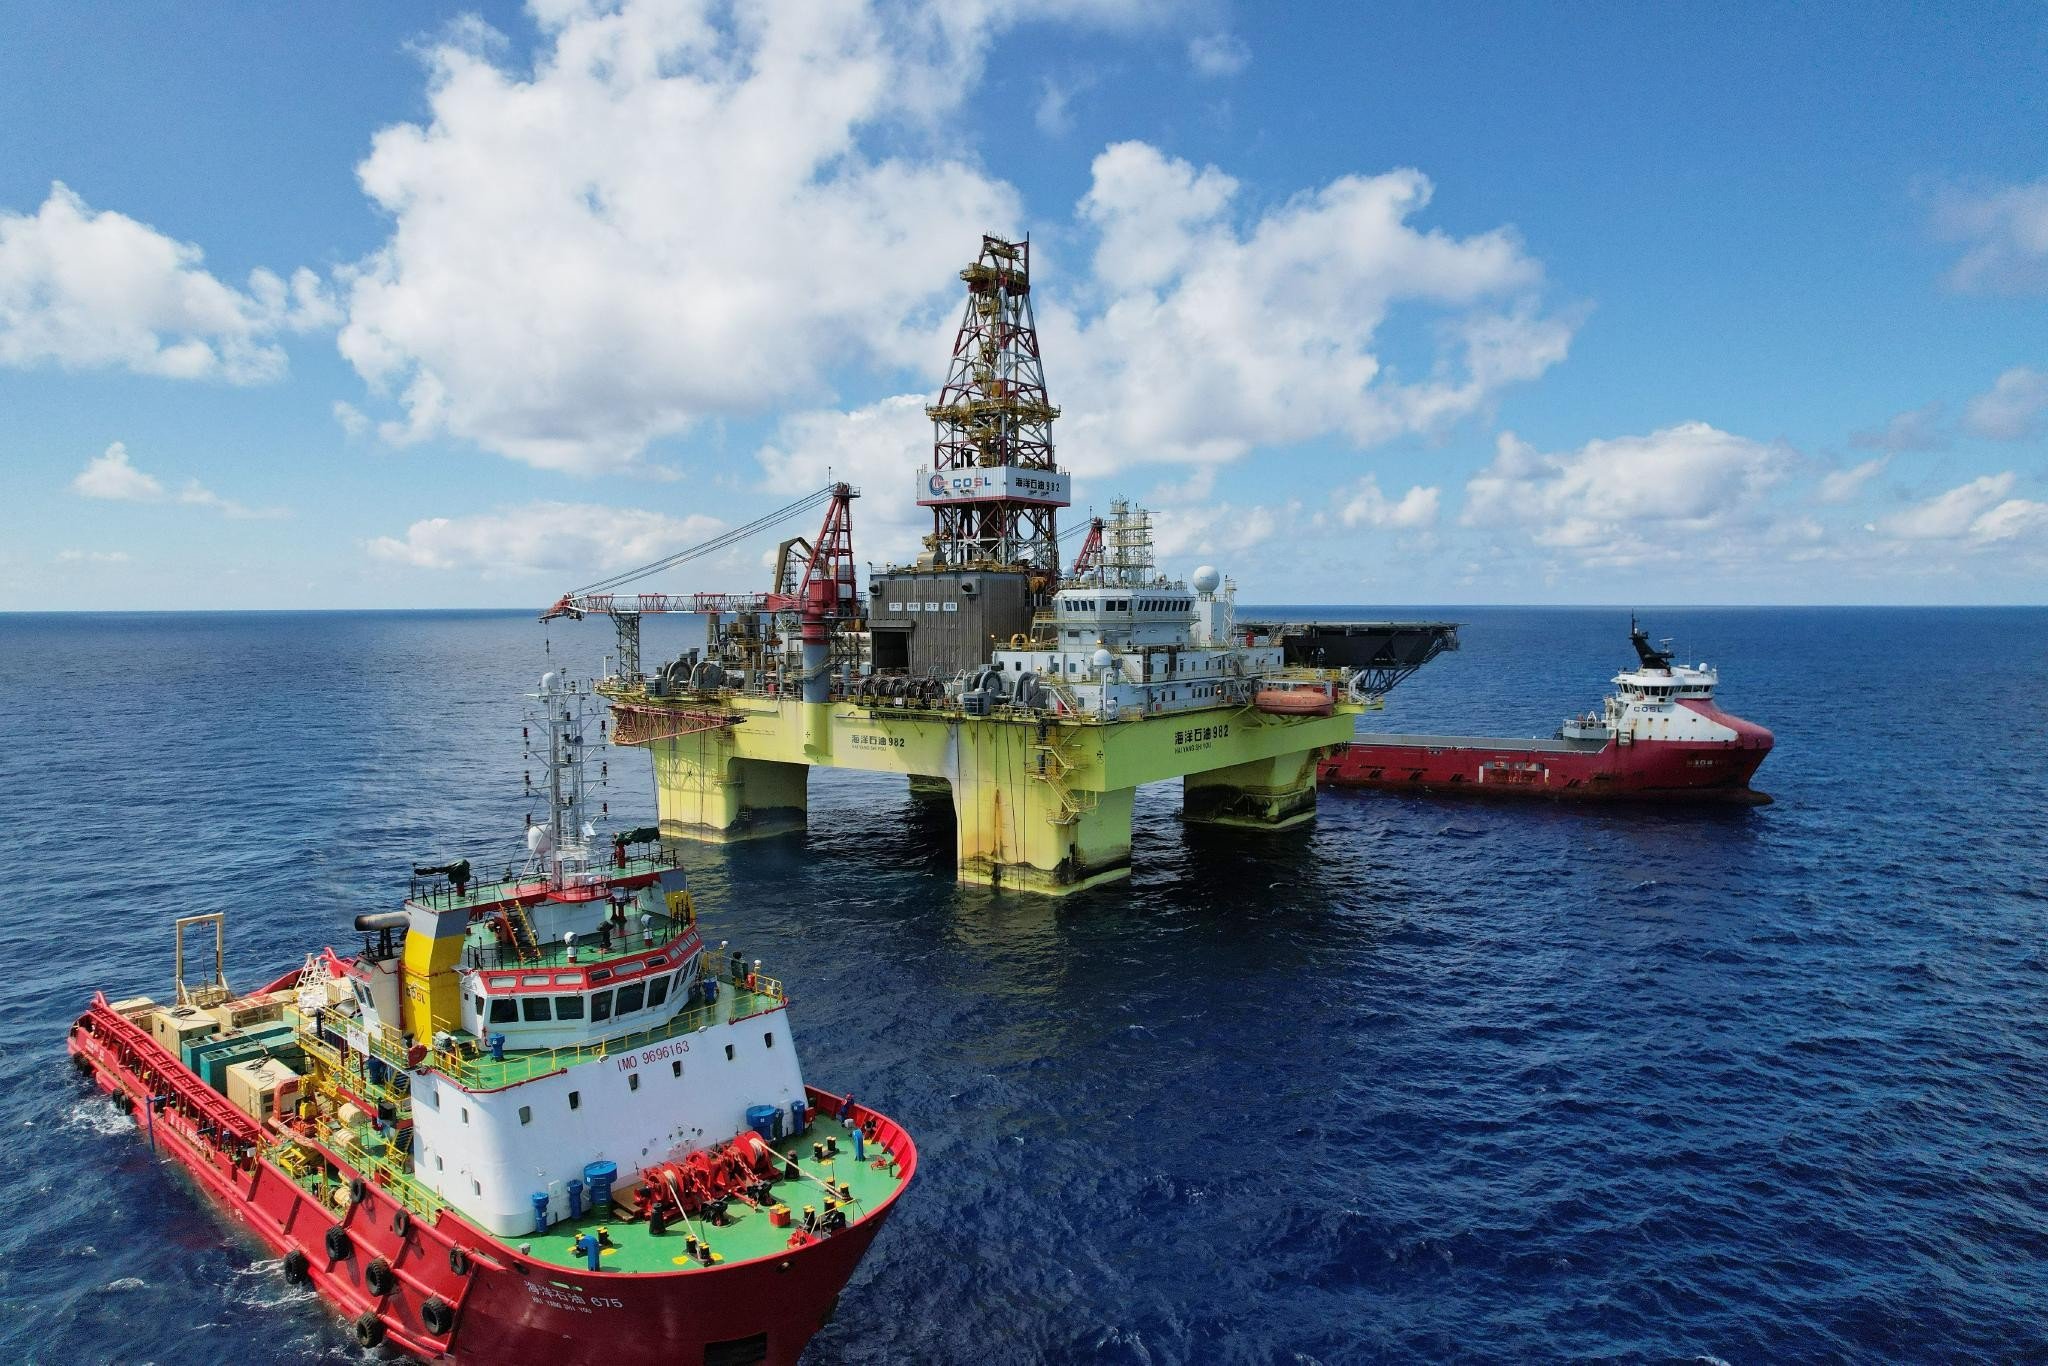 The Shenhai-1 deep water gas field is located 200 kilometres offshore from south China’s Hainan province. Photo: Handout